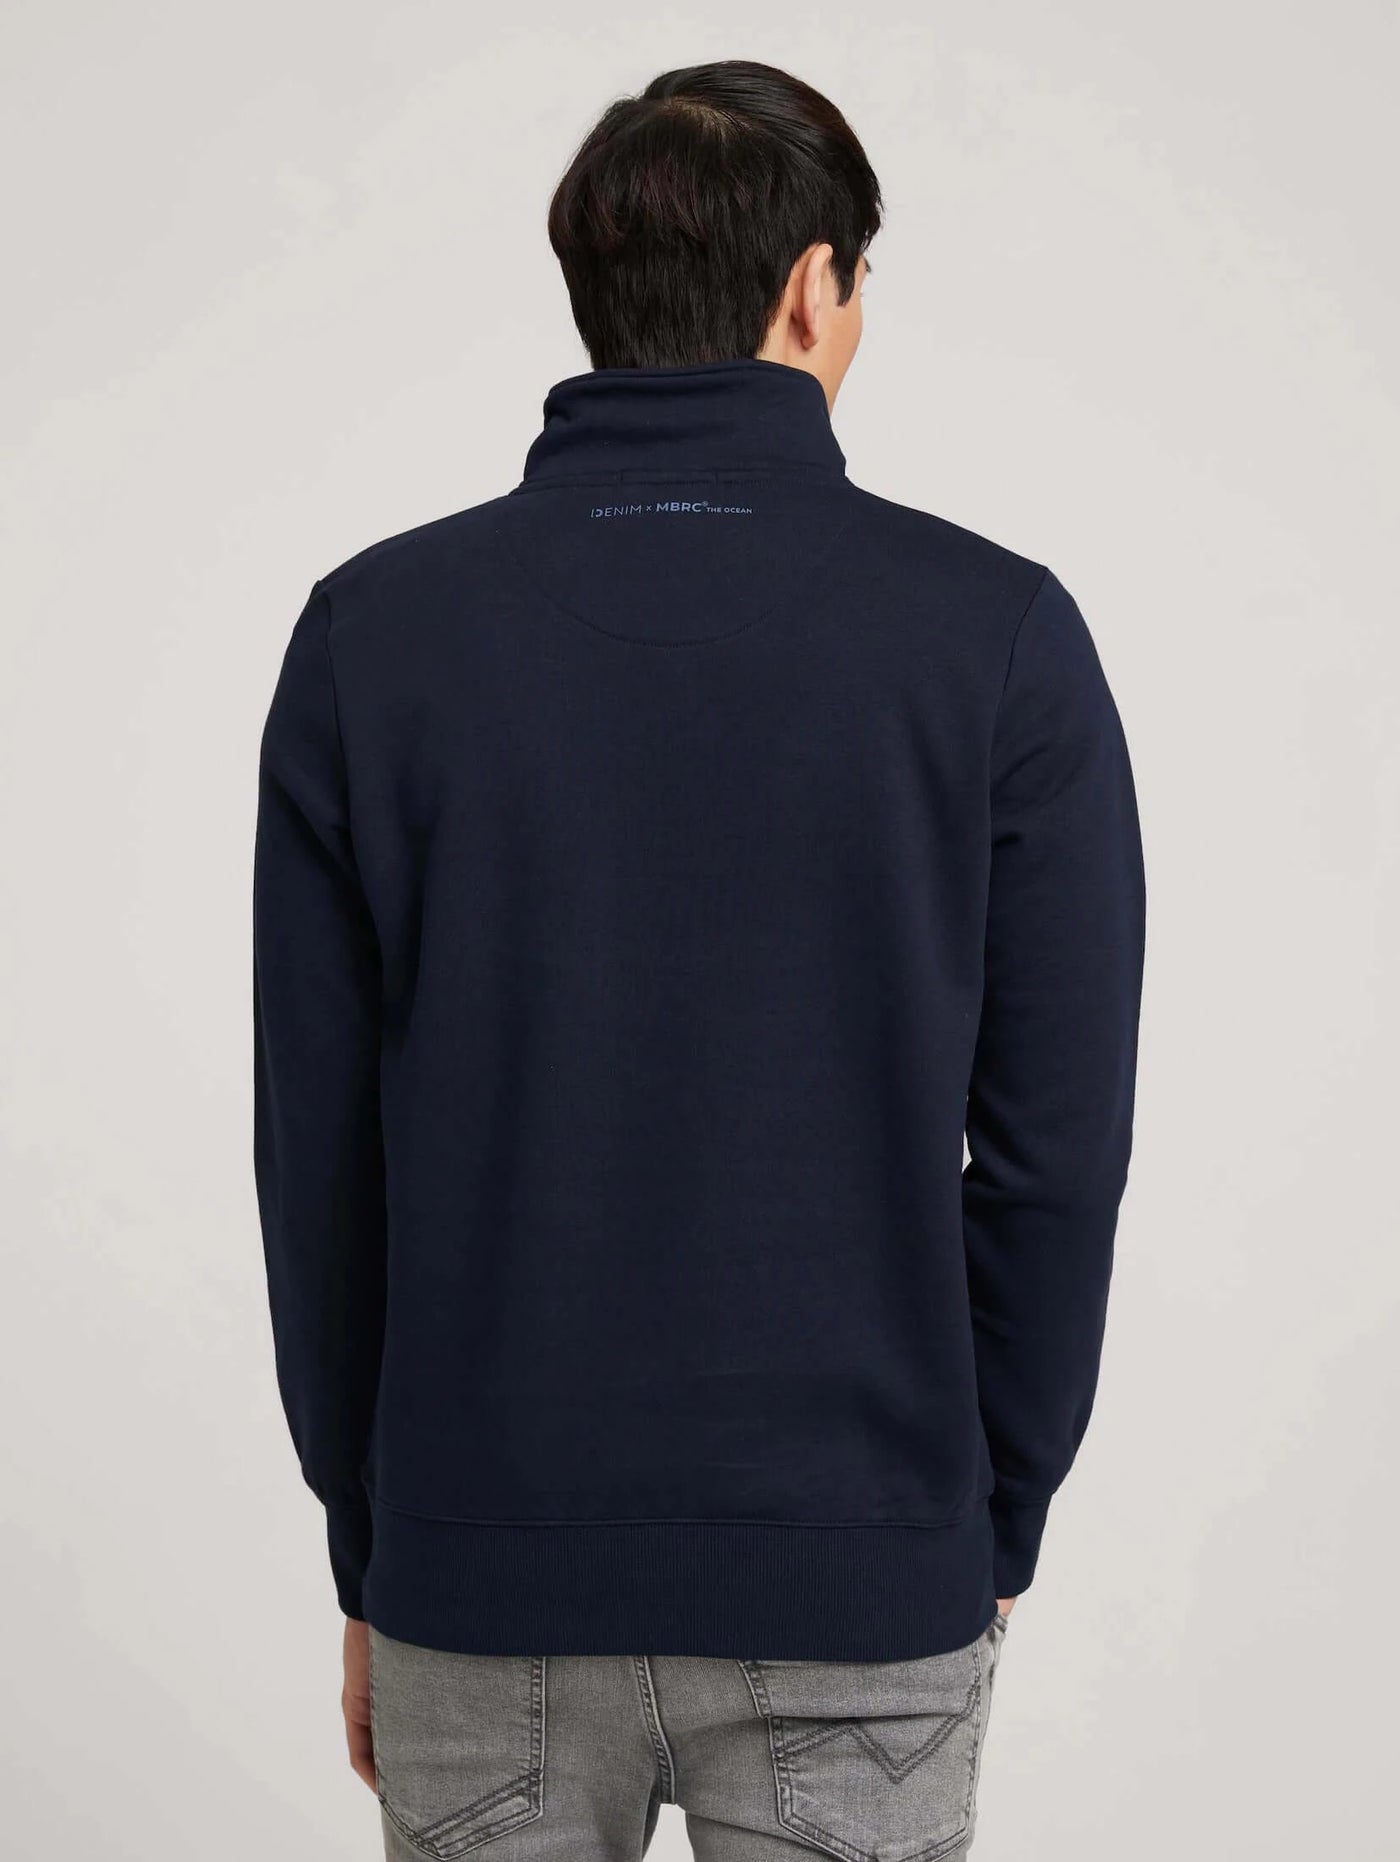 MBRC@TOMTAILOR - MEN STAND-UP SWEATER - BACK VIEW